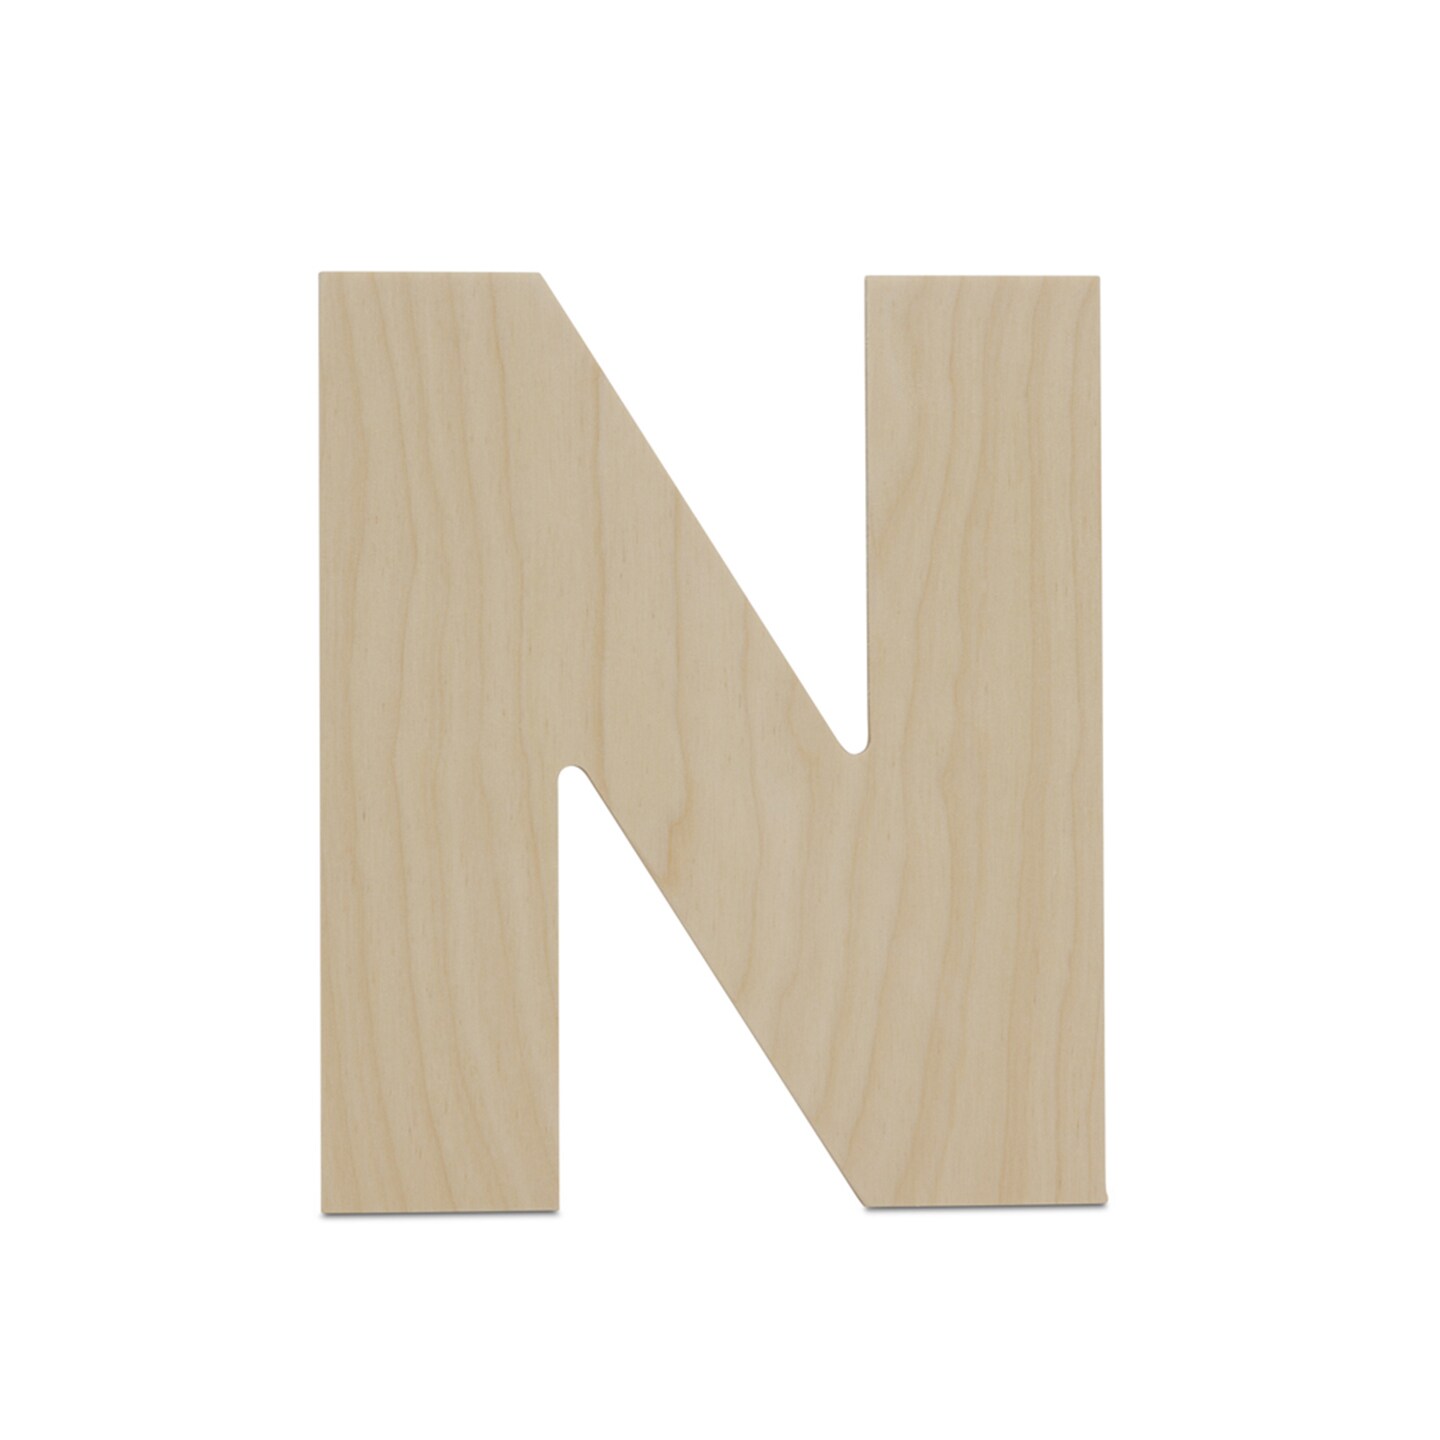 Wooden Letter N 12 inch or 8 inch, Unfinished Large Wood Letters for Crafts | Woodpeckers